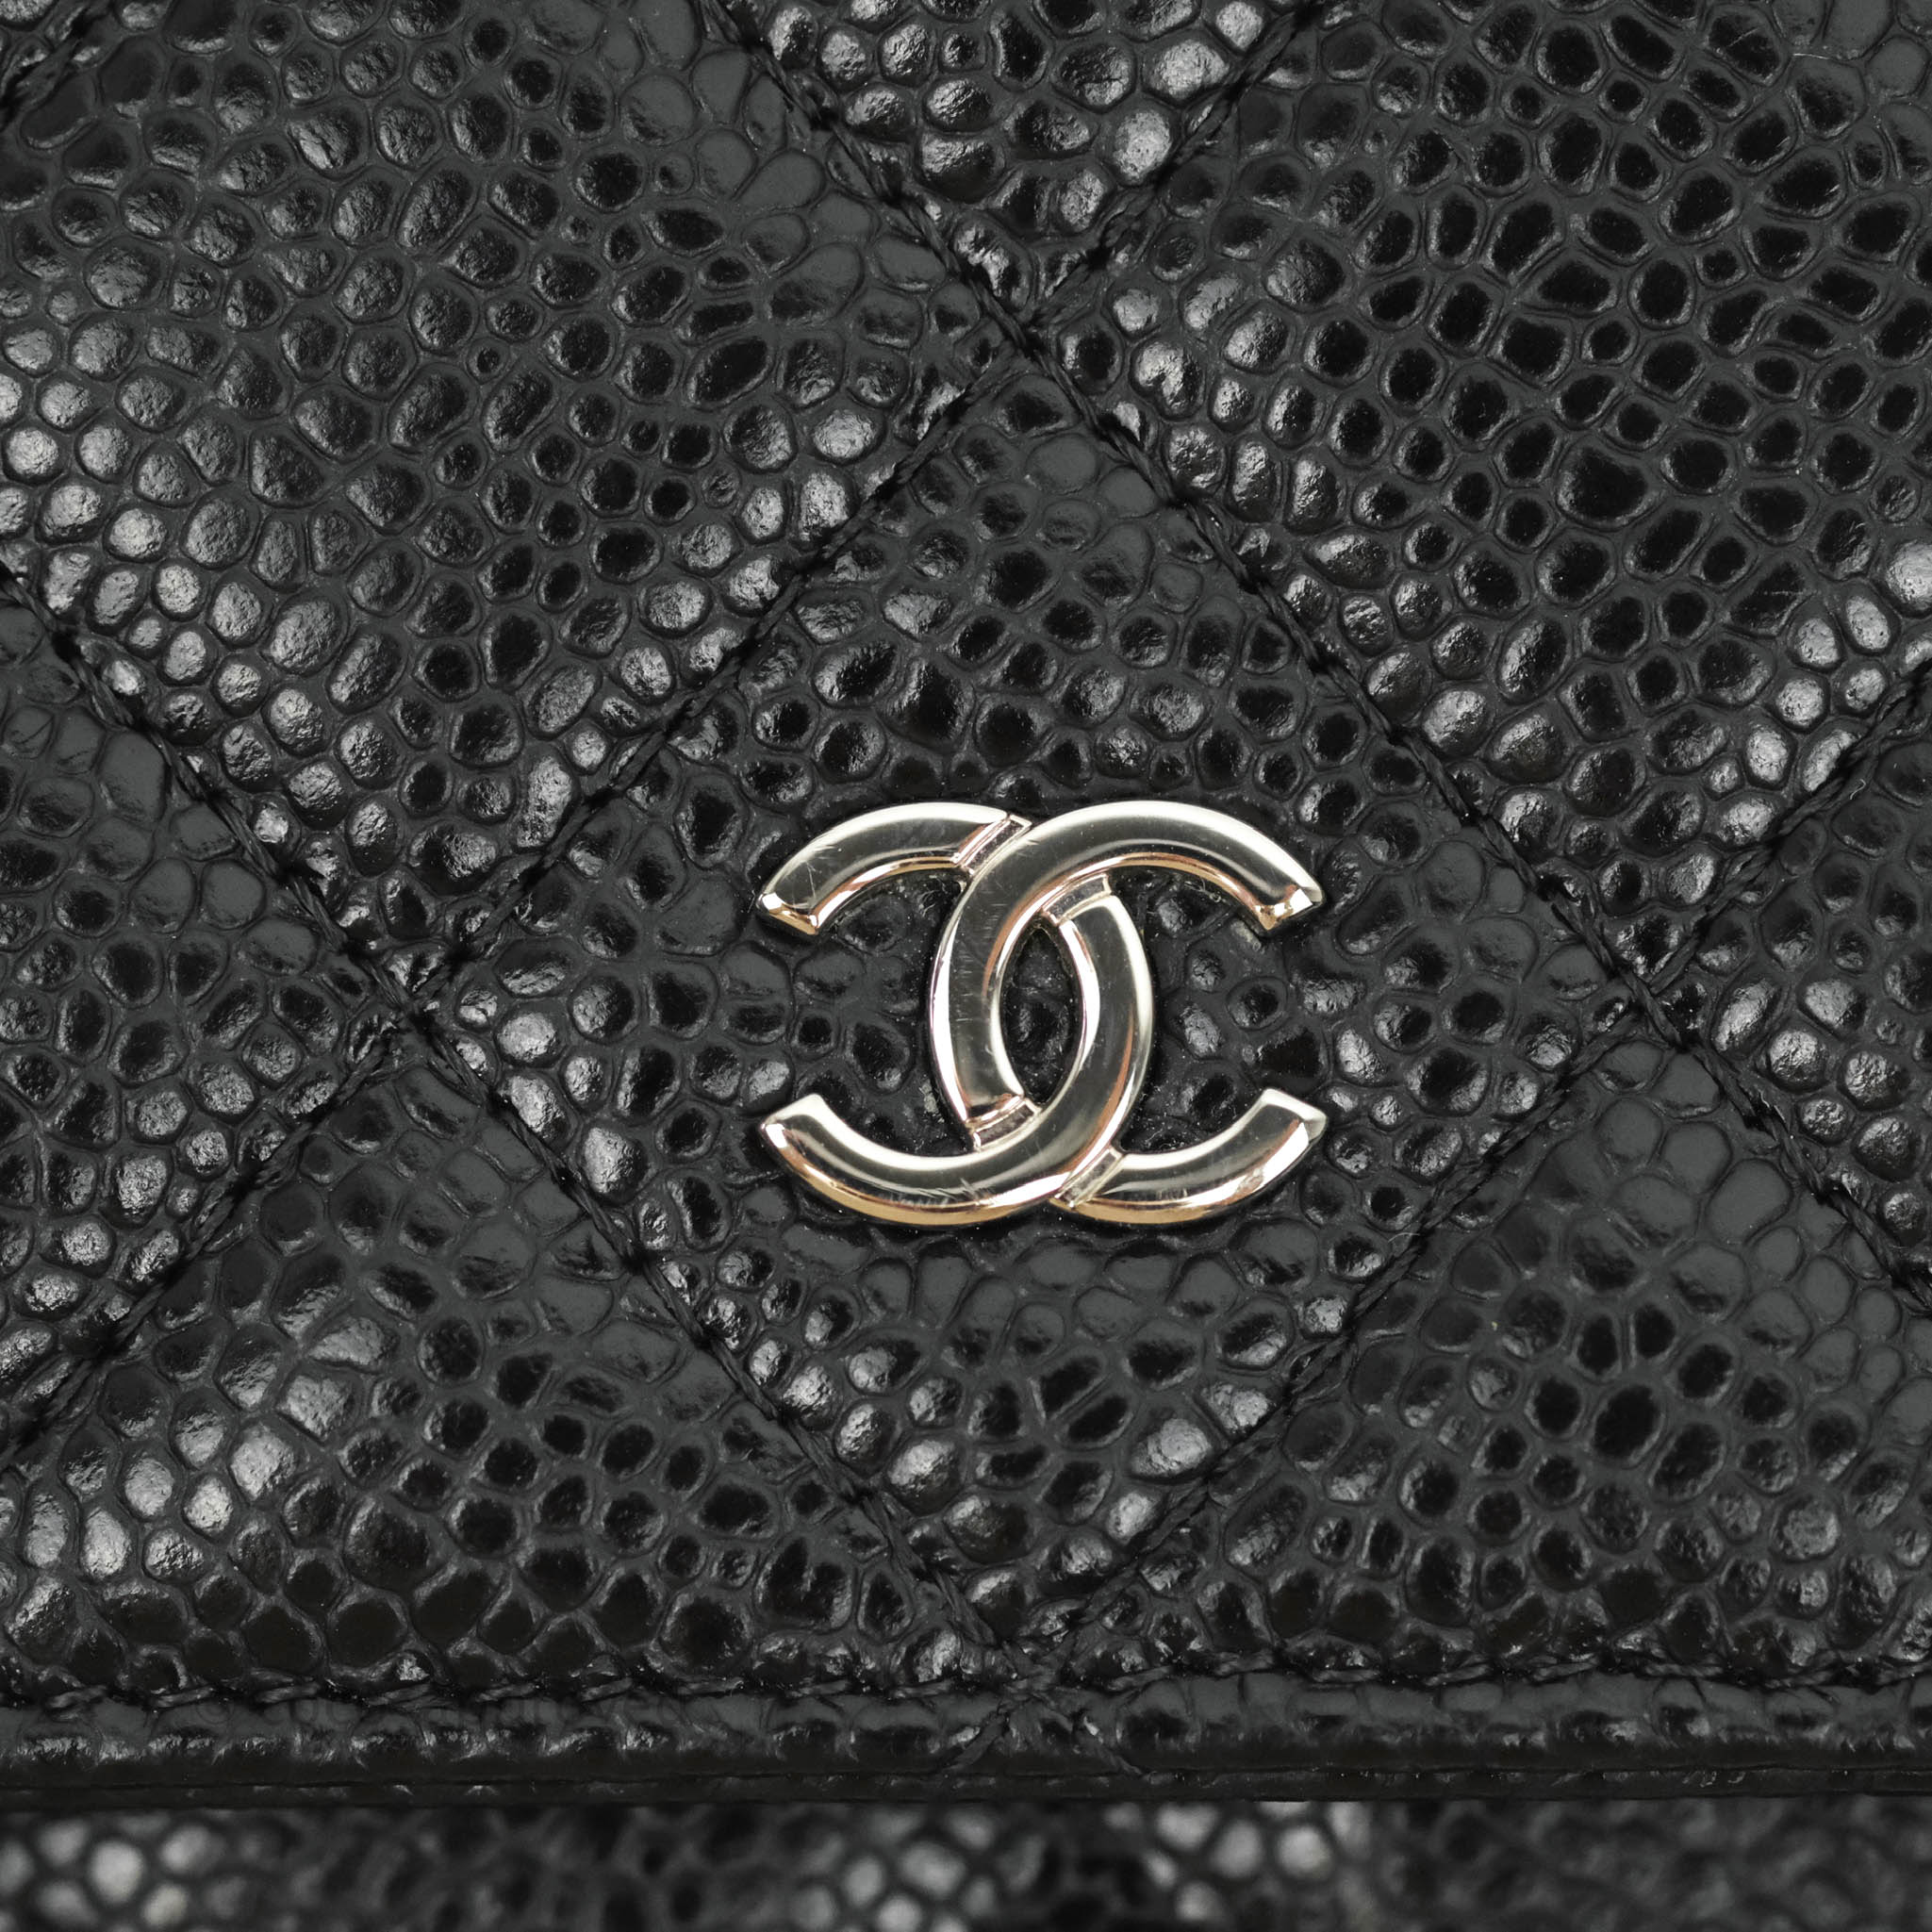 Chanel 2017 black caviar WOC Wallet on Chain with shiny silver hardware  Leather ref.854734 - Joli Closet